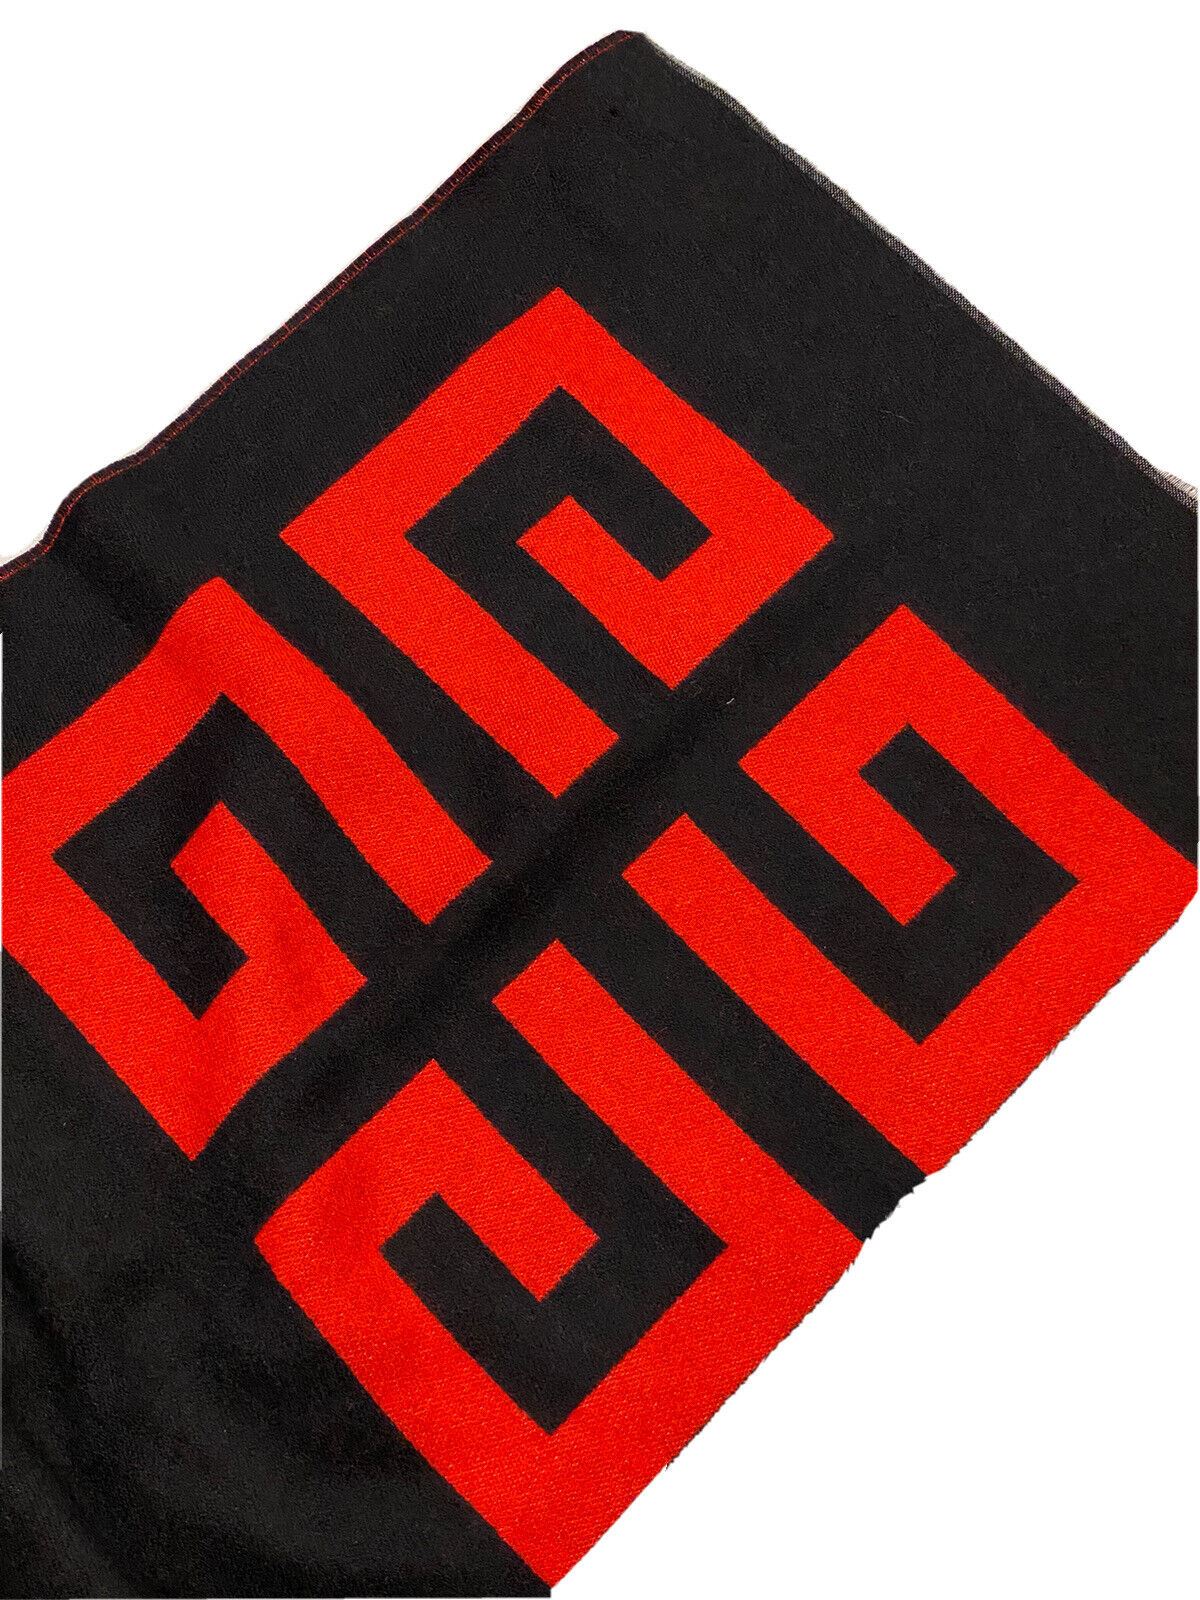 NWT $400 Givenchy Logo Reversible Wool Blend Black/Red Scarf 14"W x 70"L Italy